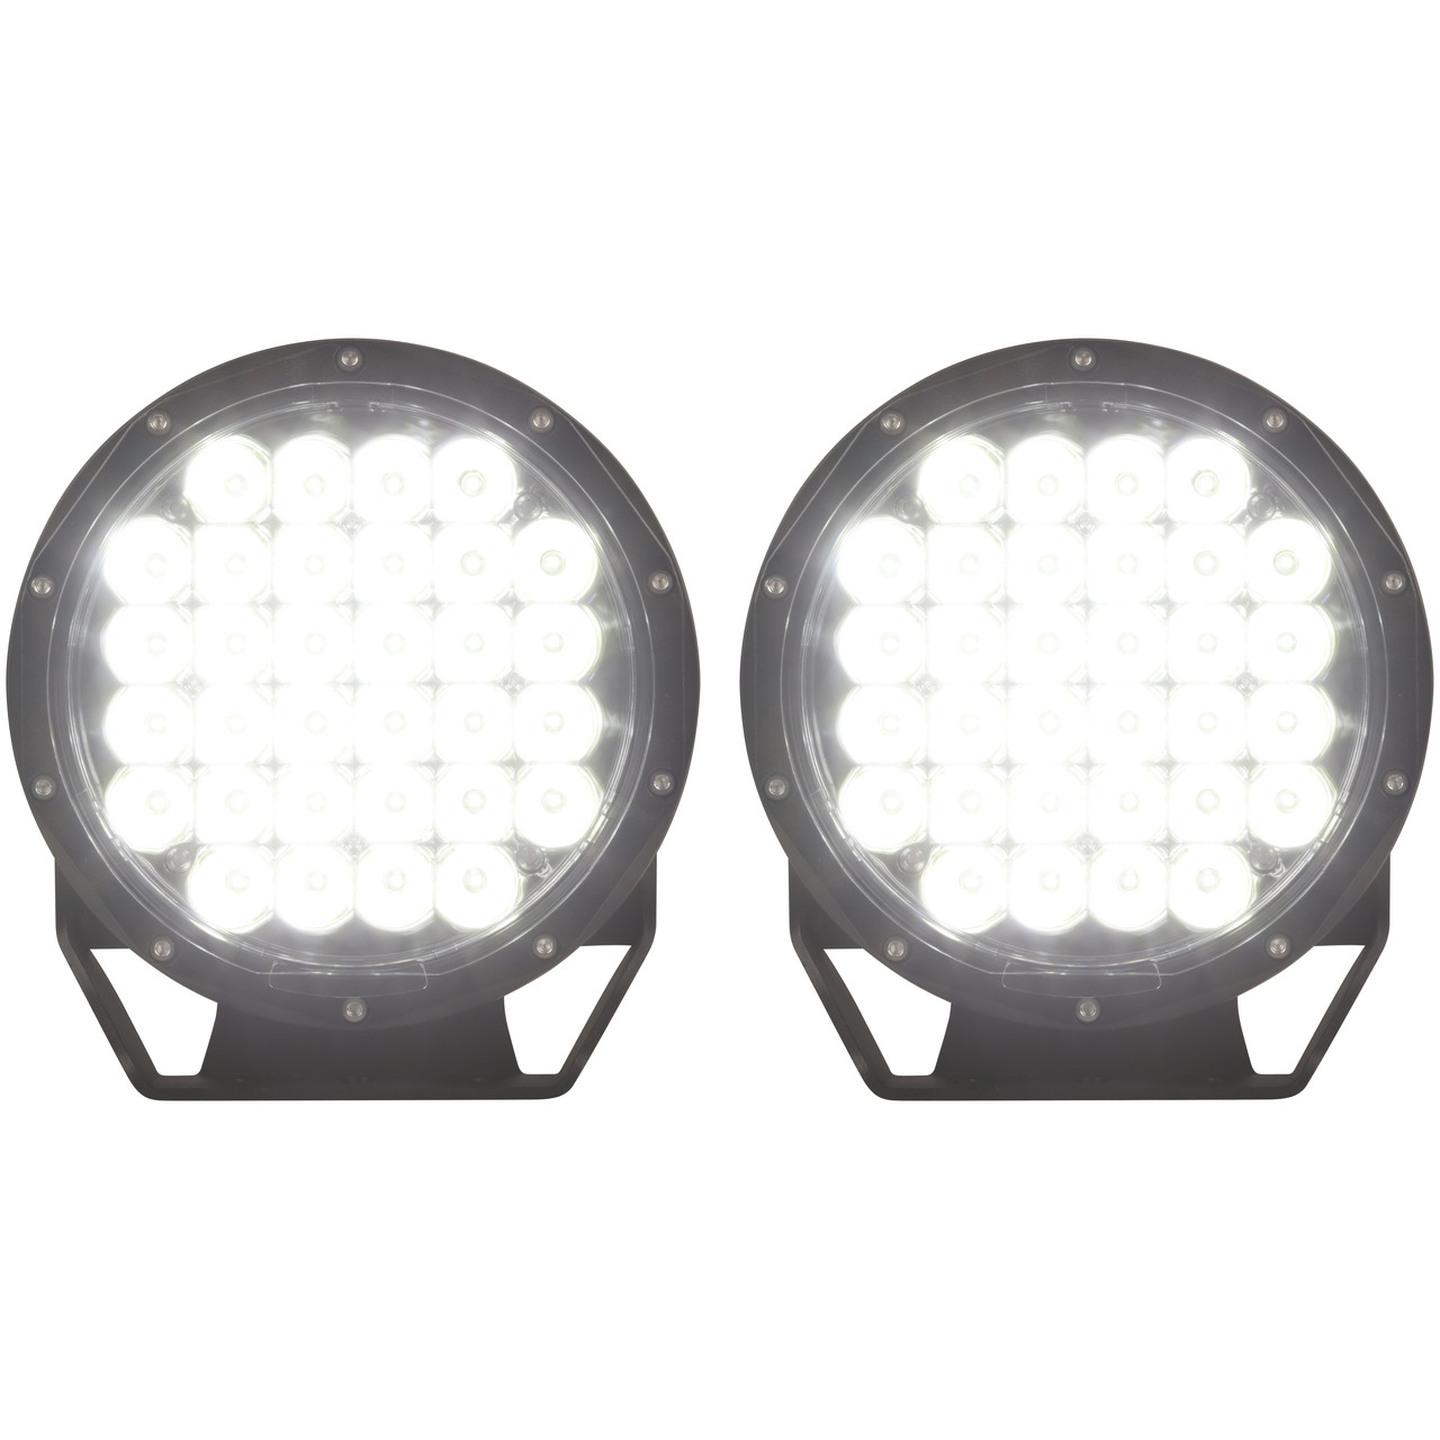 7900 Lumen 9 Inch Solid LED Driving Light Sold as Pair